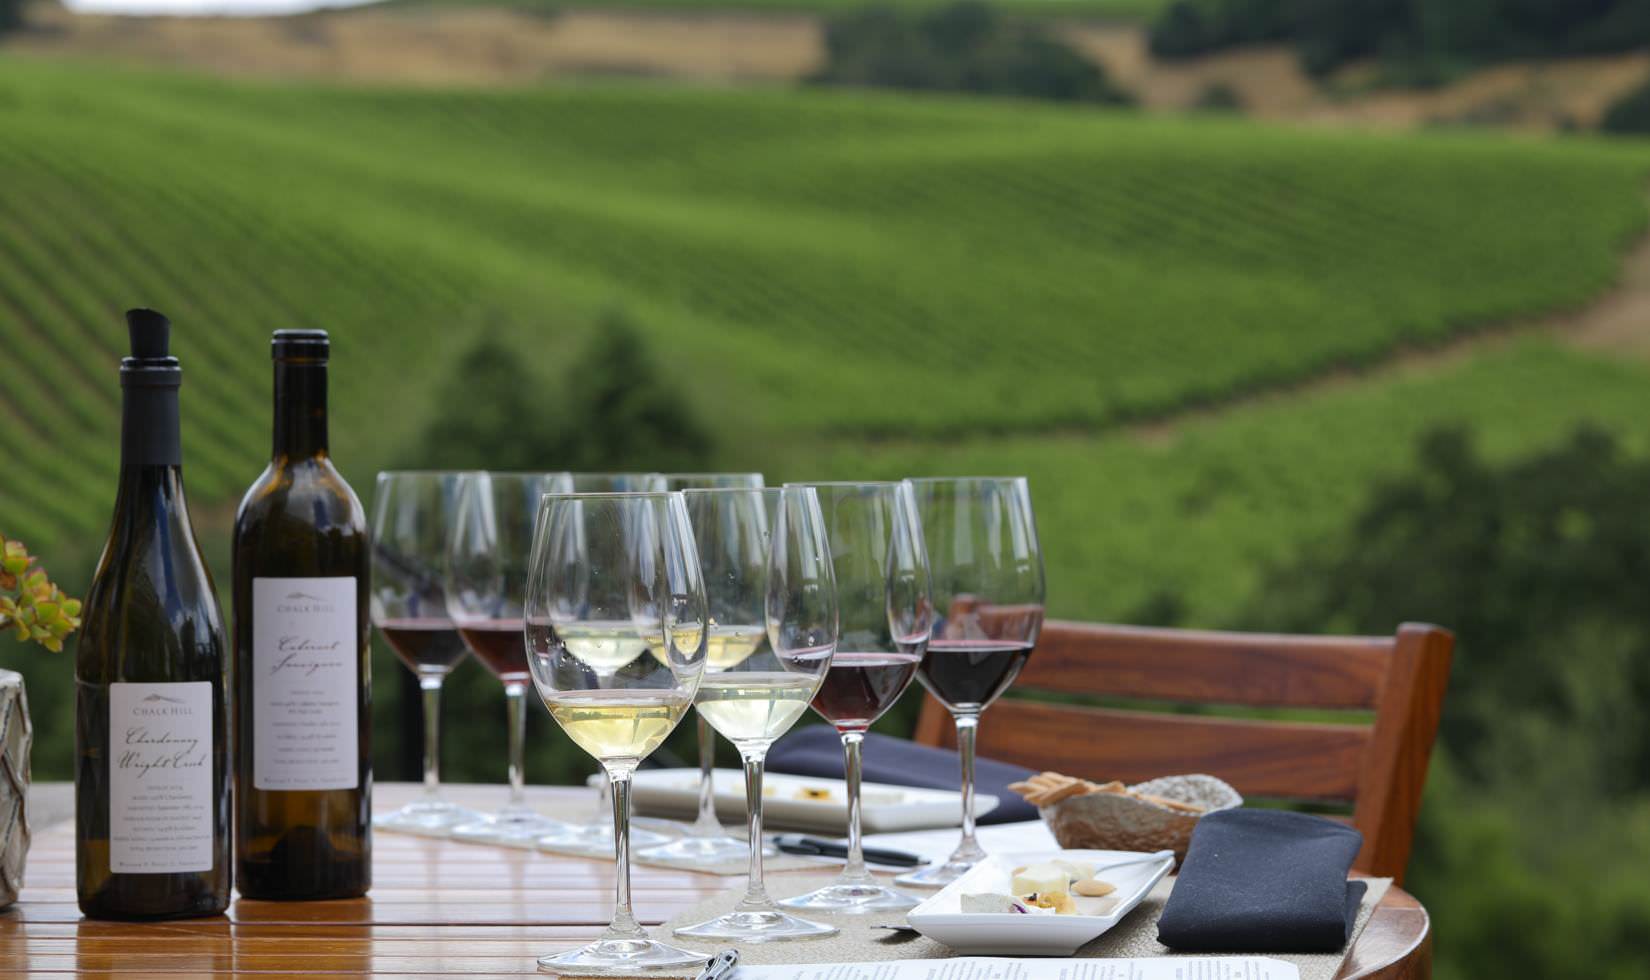 Enjoy cheese and wine tasting at Chalk Hill